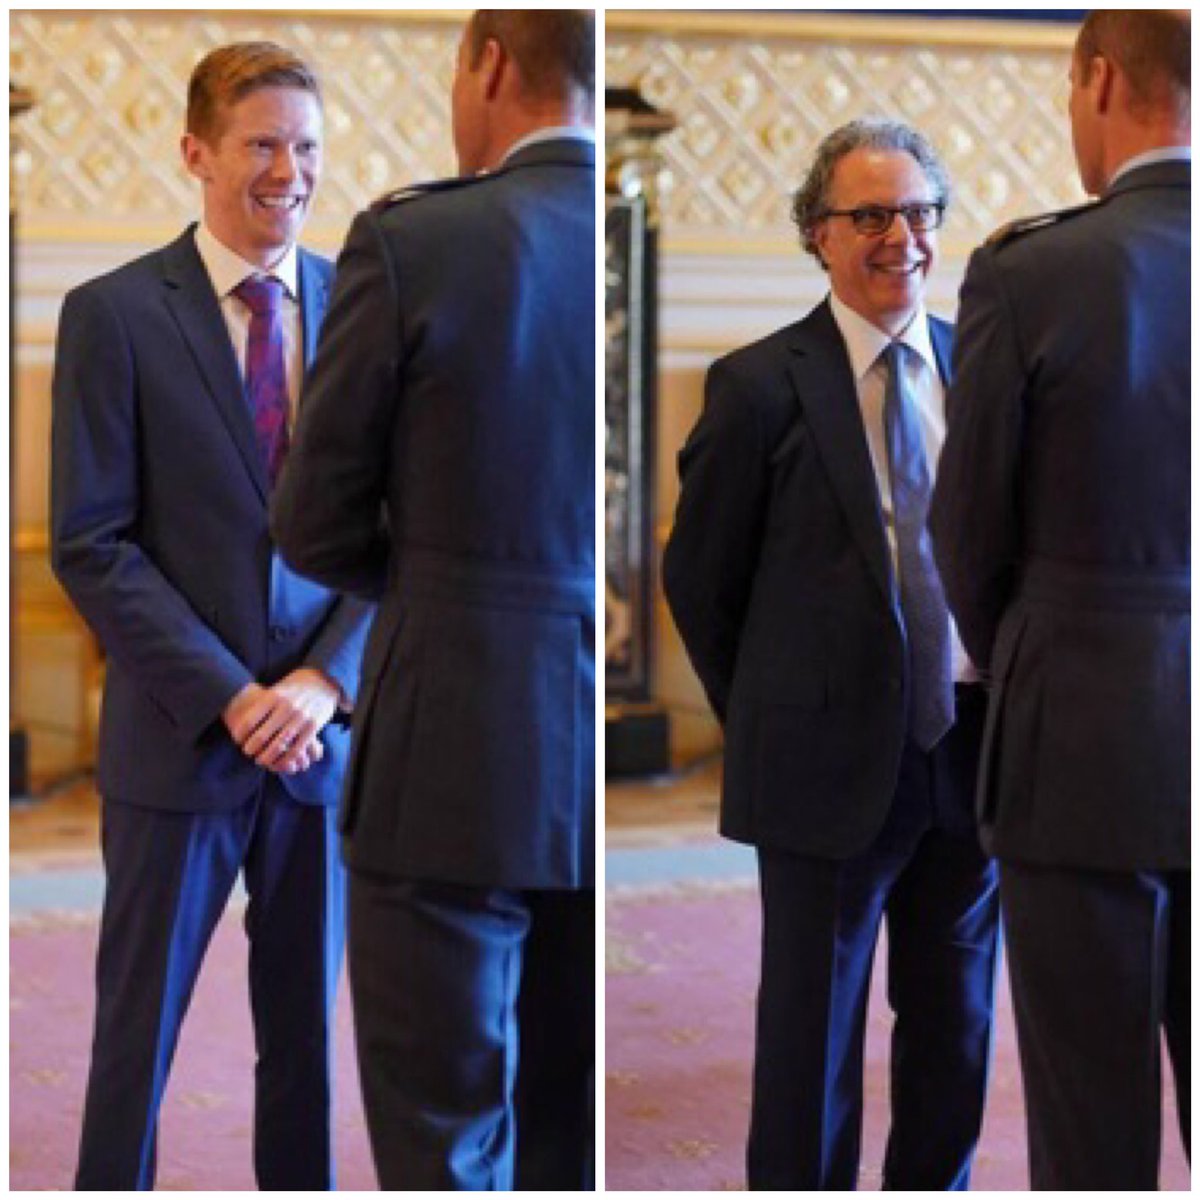 Happy faces today meeting Prince William at the investiture at Windsor Castle 🏰 🎖️Mr. Ian Russell, Chair of Trustees, Molly Rose Foundation, OBE. The honour recognises services to child safety online. 🎖️Mr. Thomas Bosworth, OBE. For Sports #PrinceWilliam #PrinceofWales #Duty